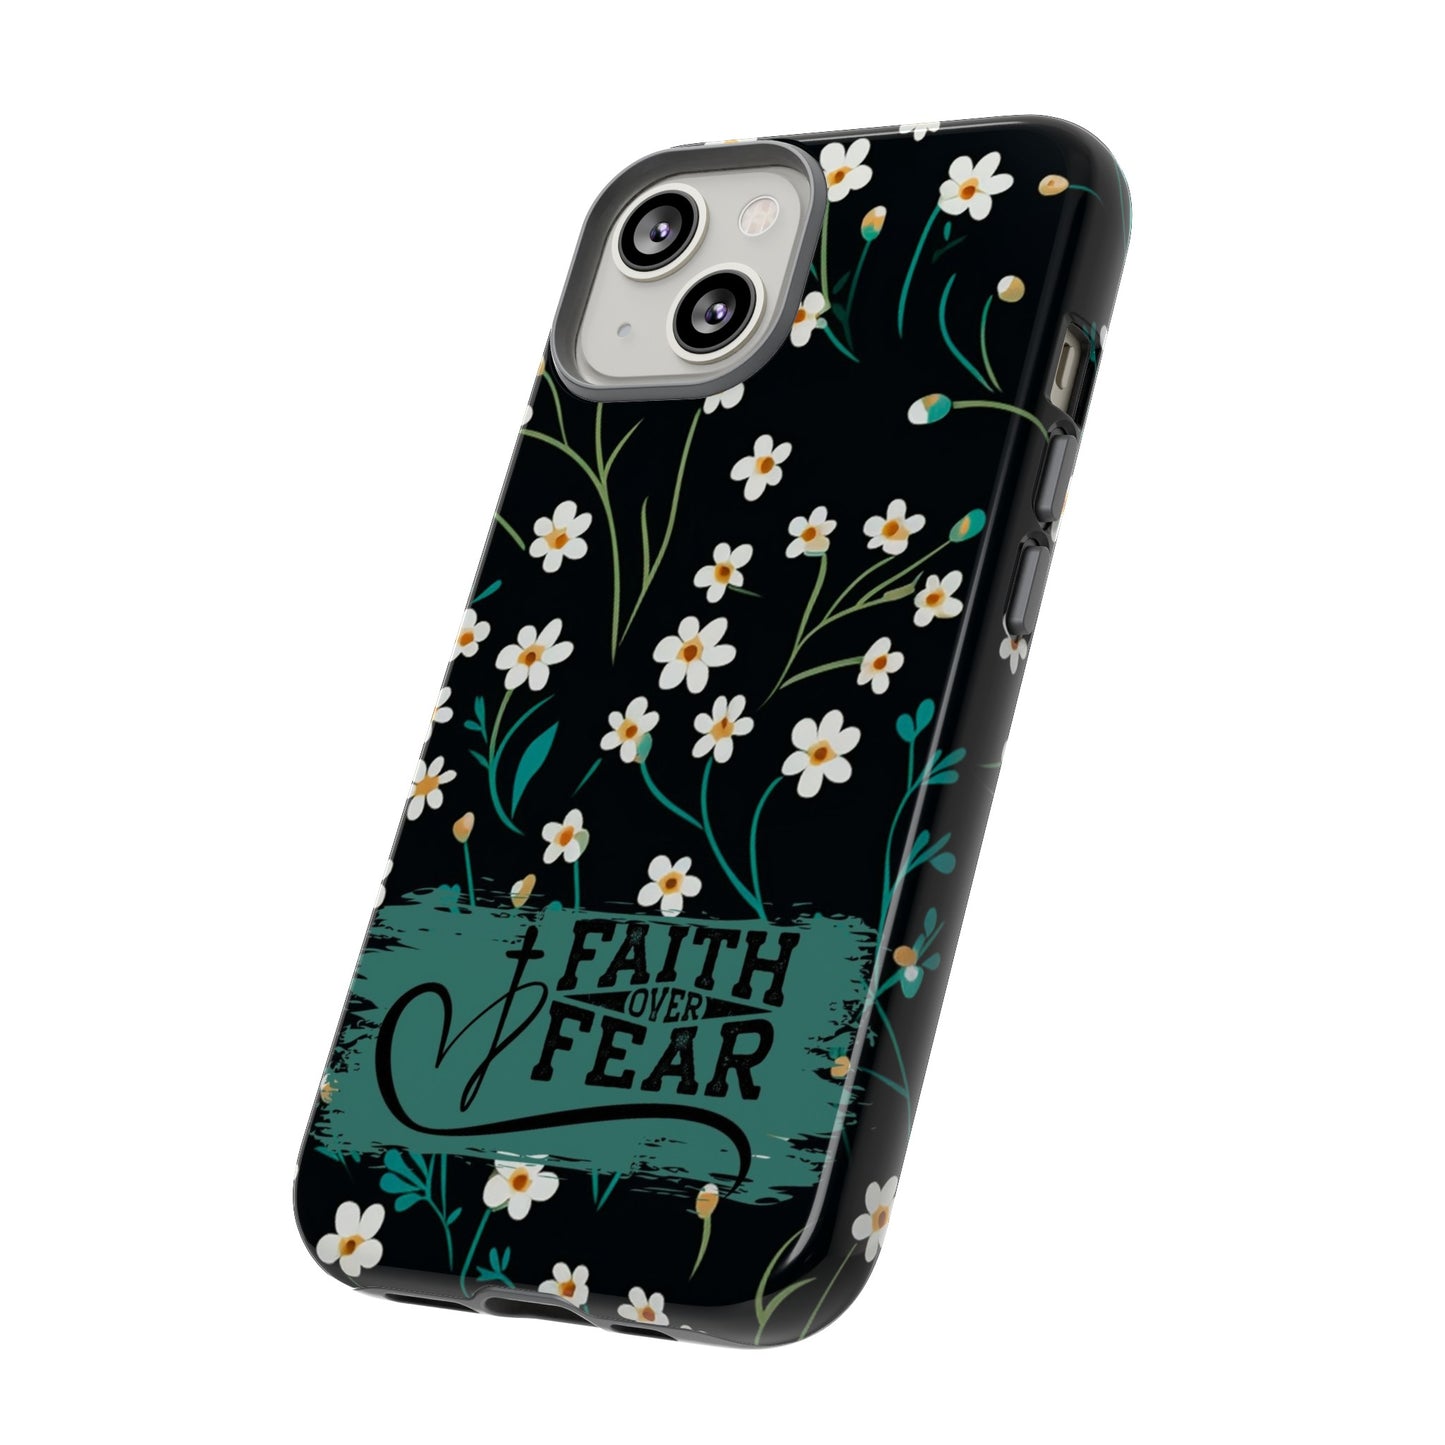 iPhone Case With Faith Over Fear and Cross With Heart